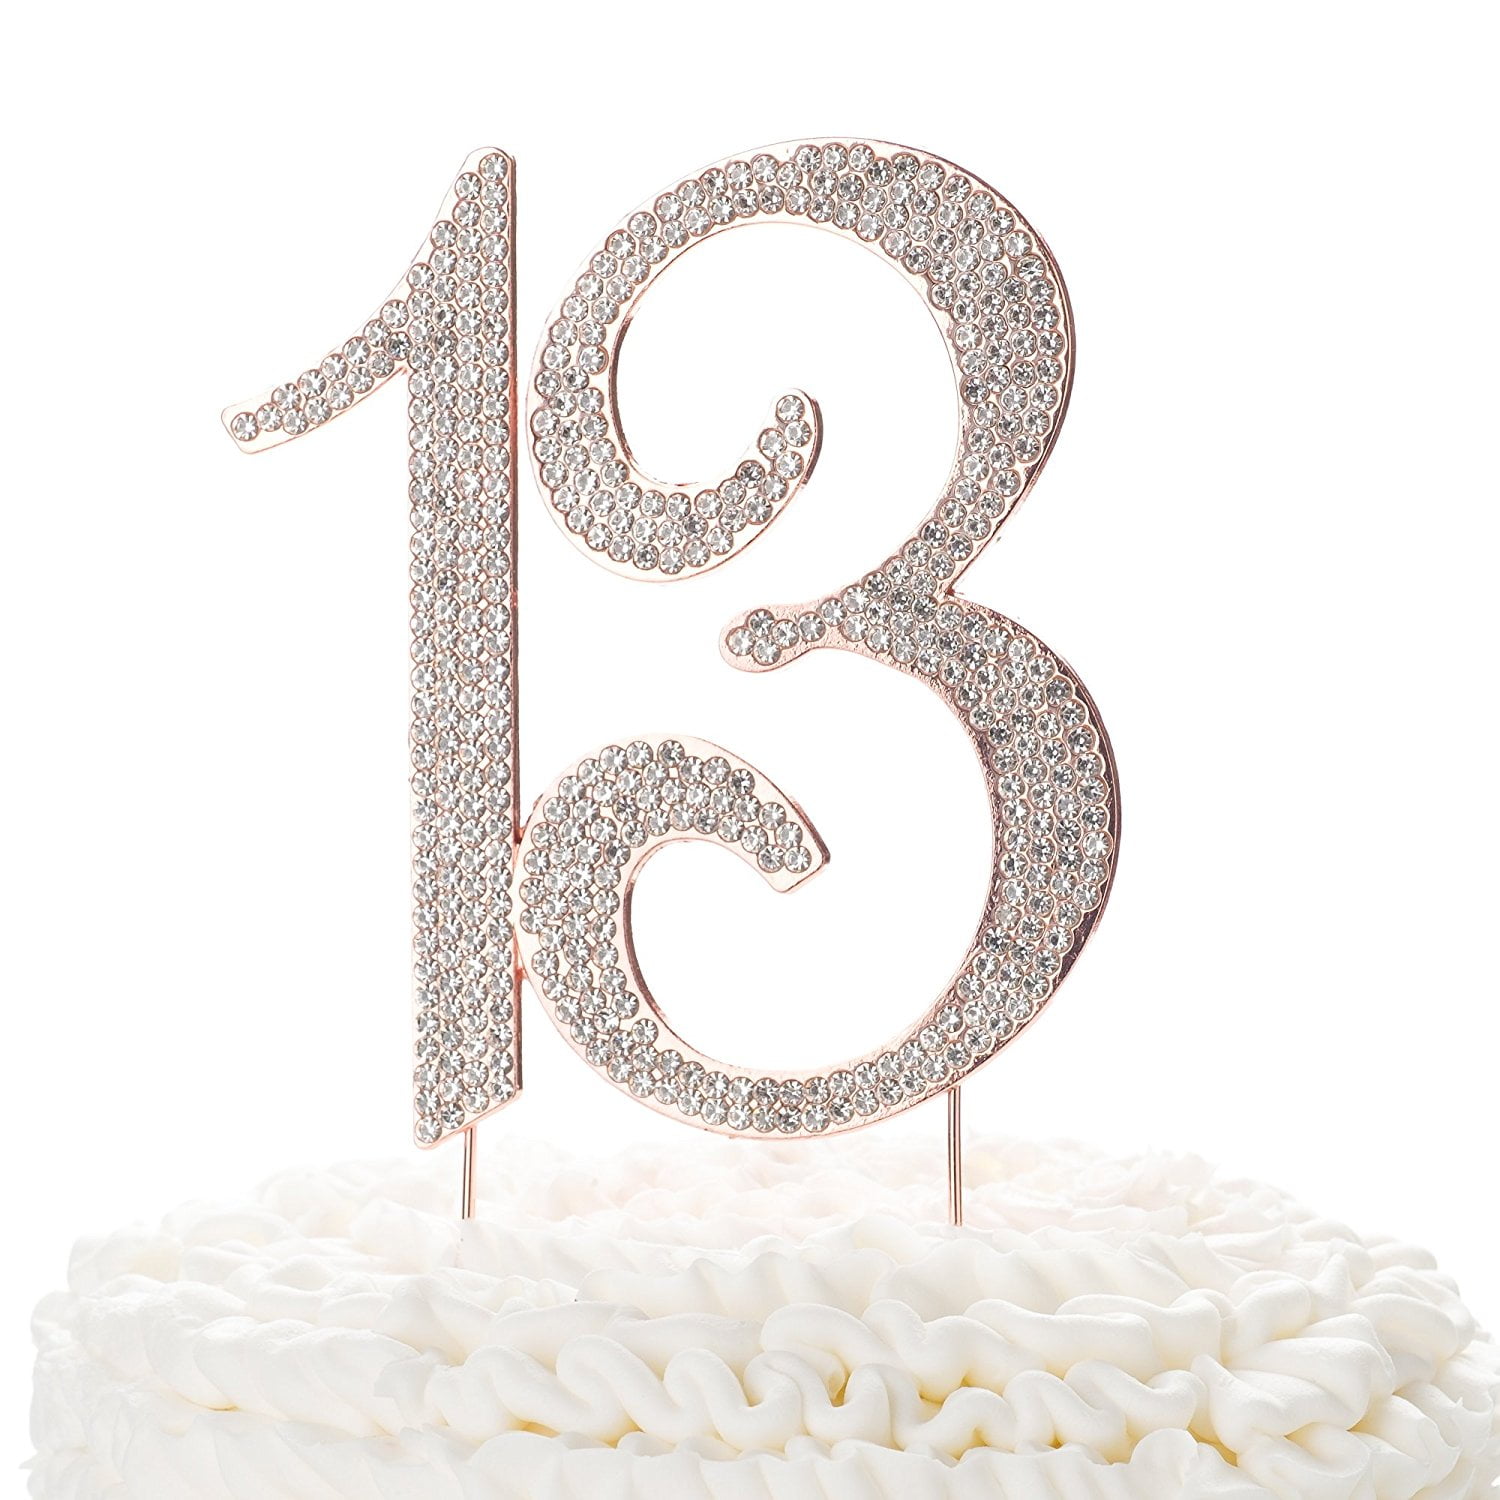 ROSE GOLD NUMERICAL CANDLE-13 CAKE TOPPER